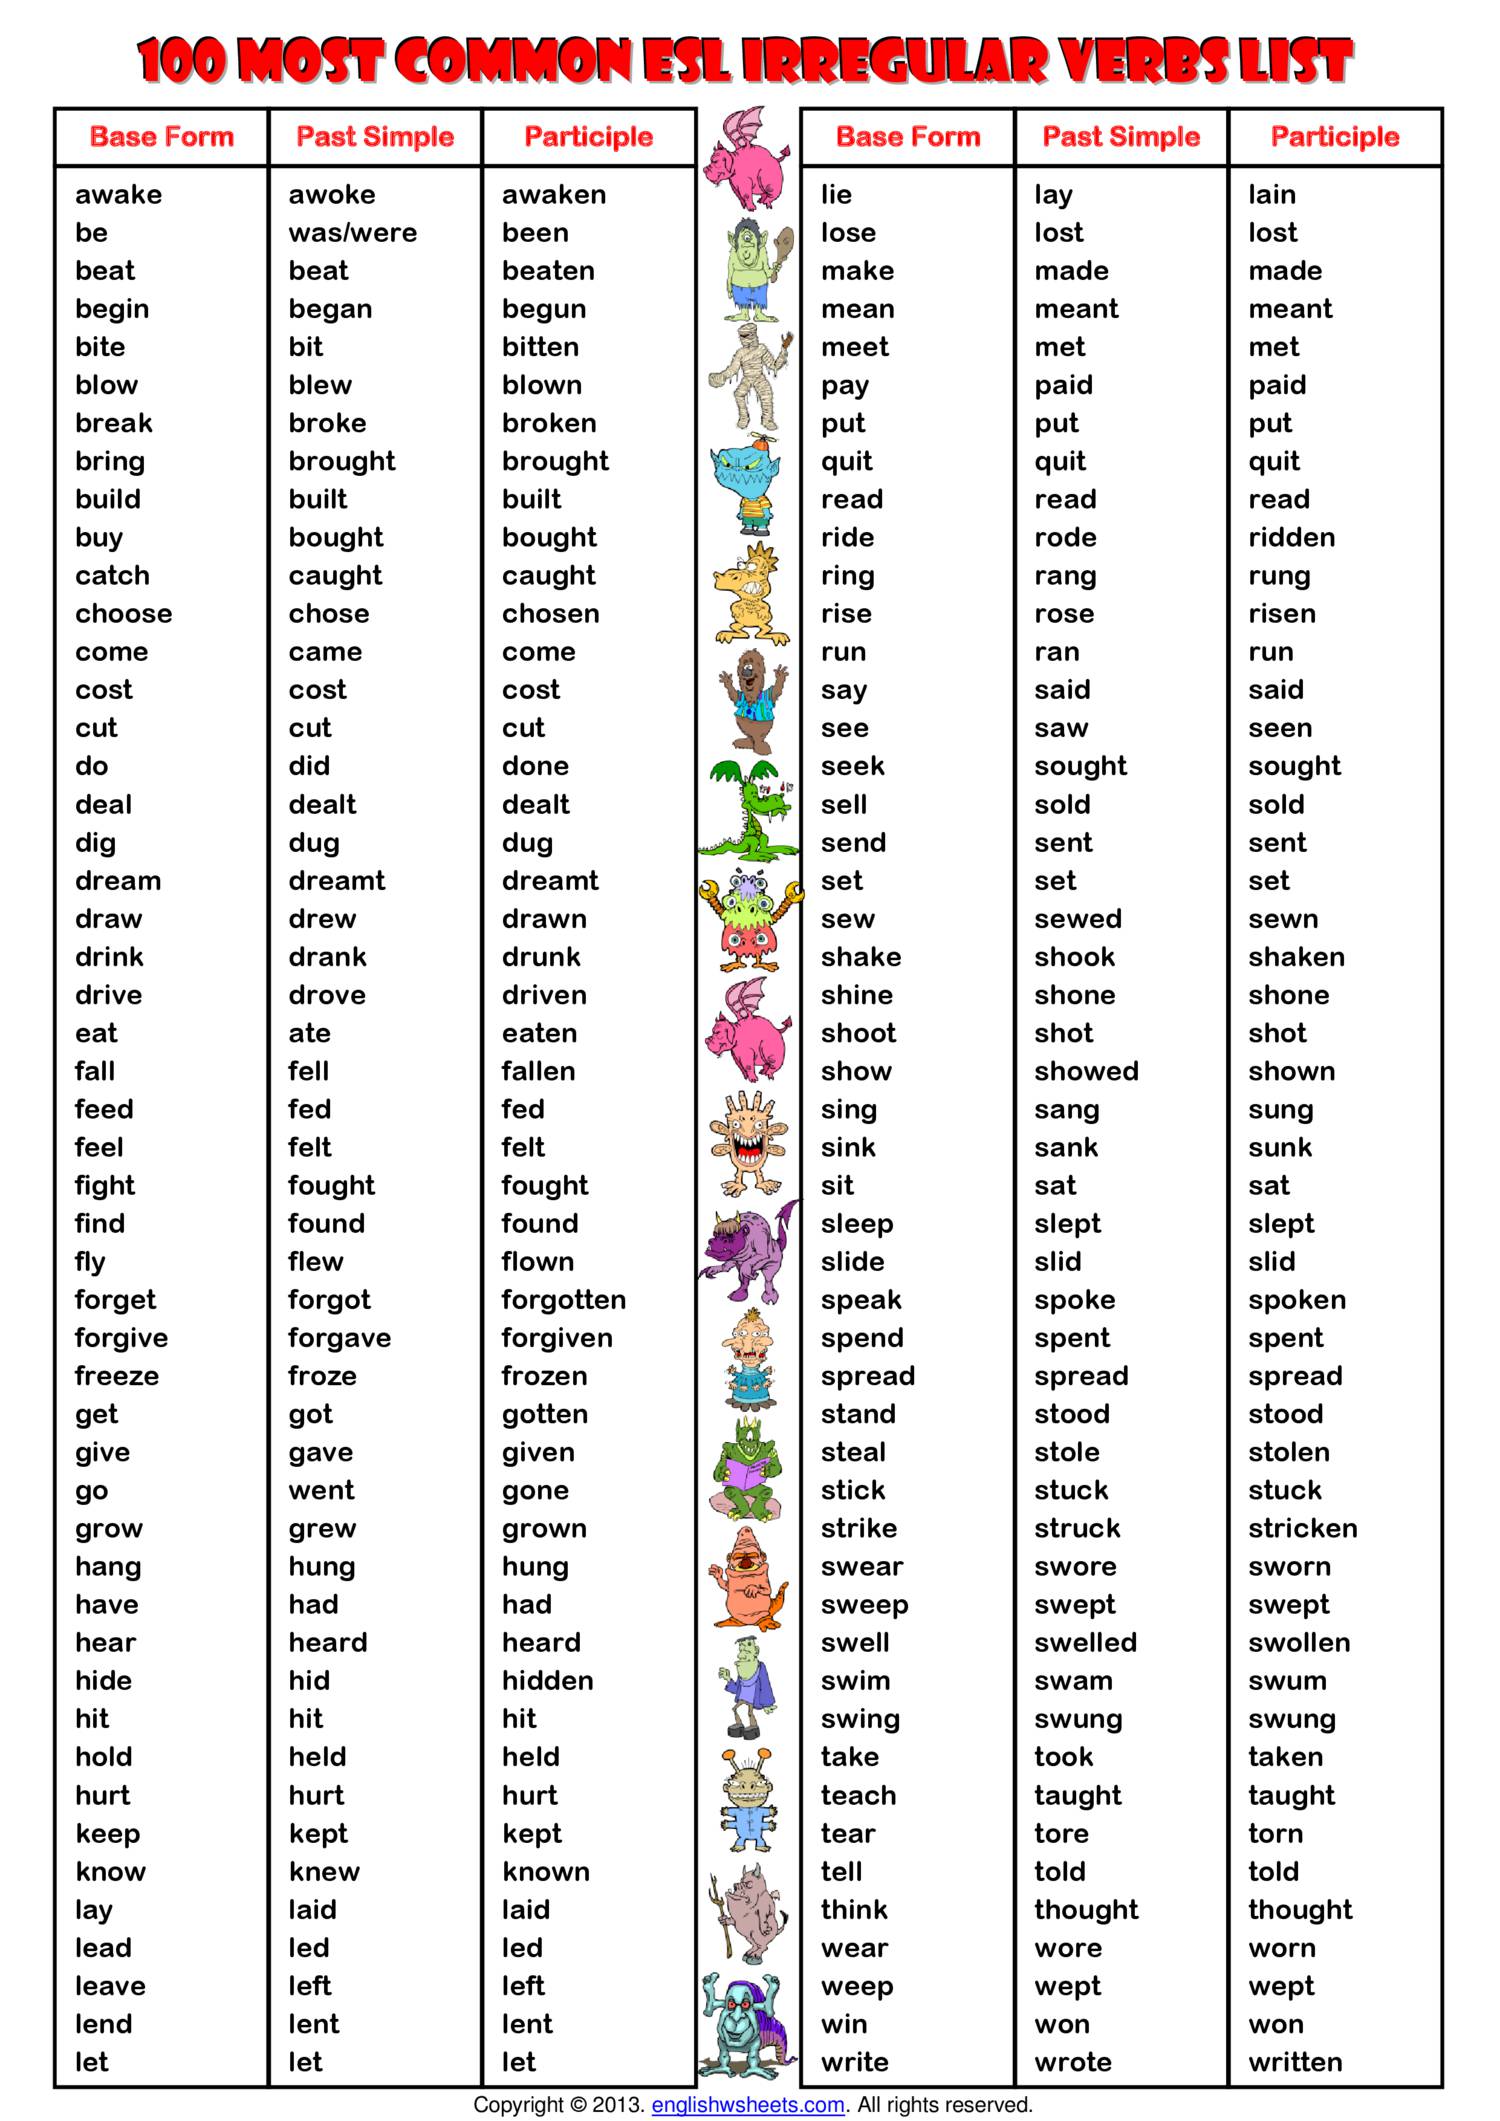 3 forms of verb list